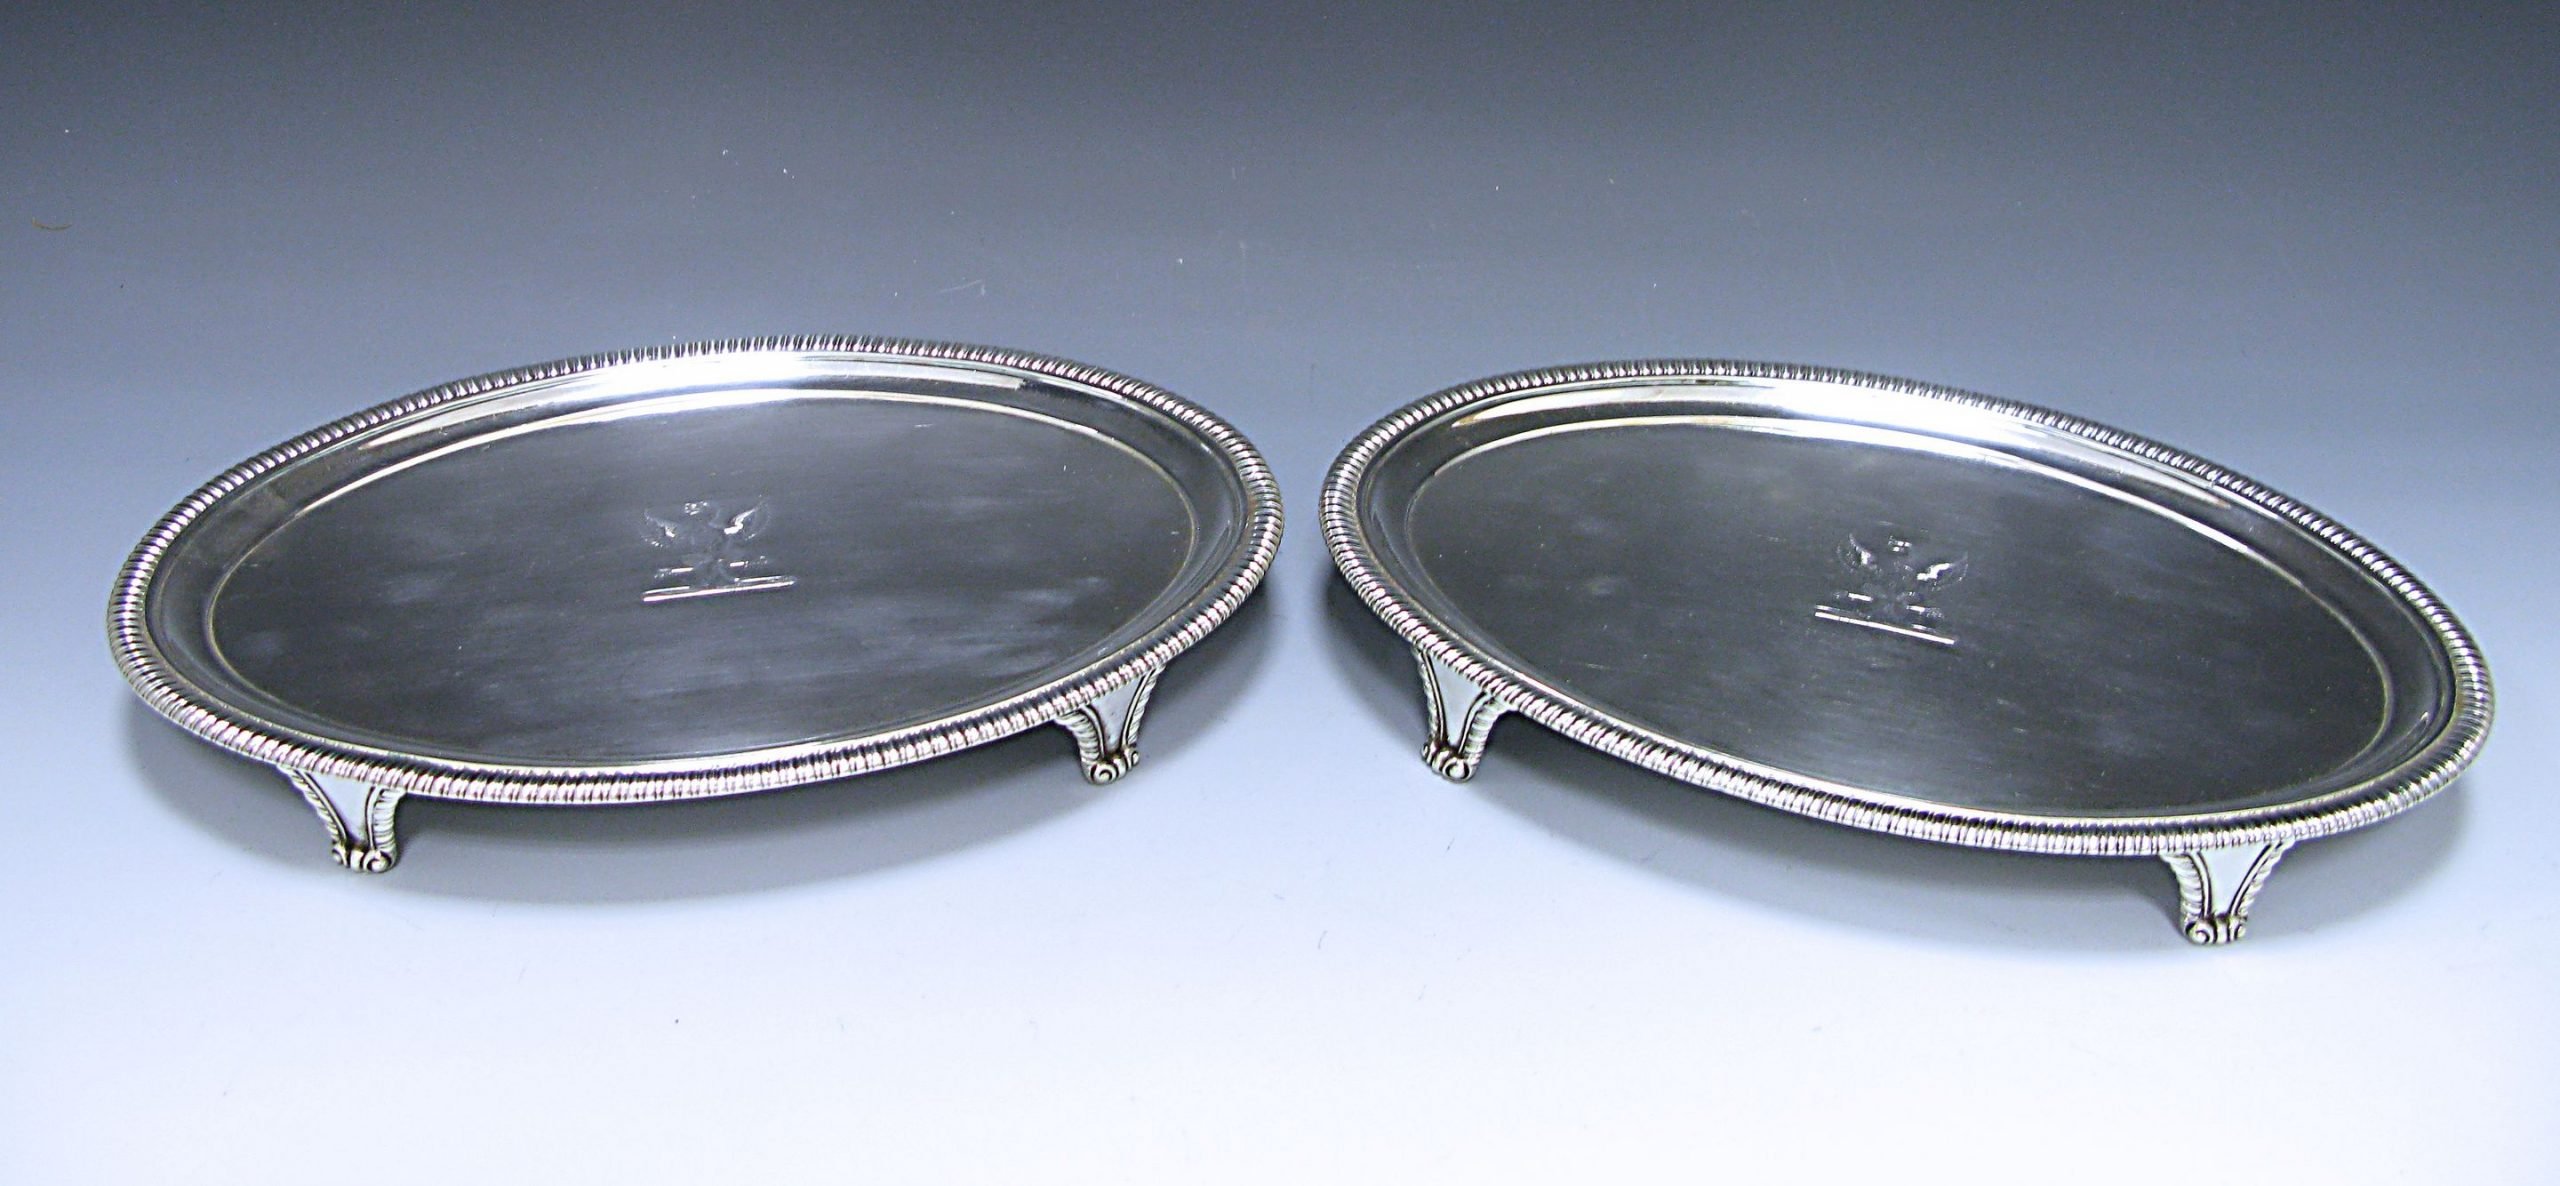 Pair of George III Sterling Silver Salvers Made in London in 1803 by Hannam and Crouch